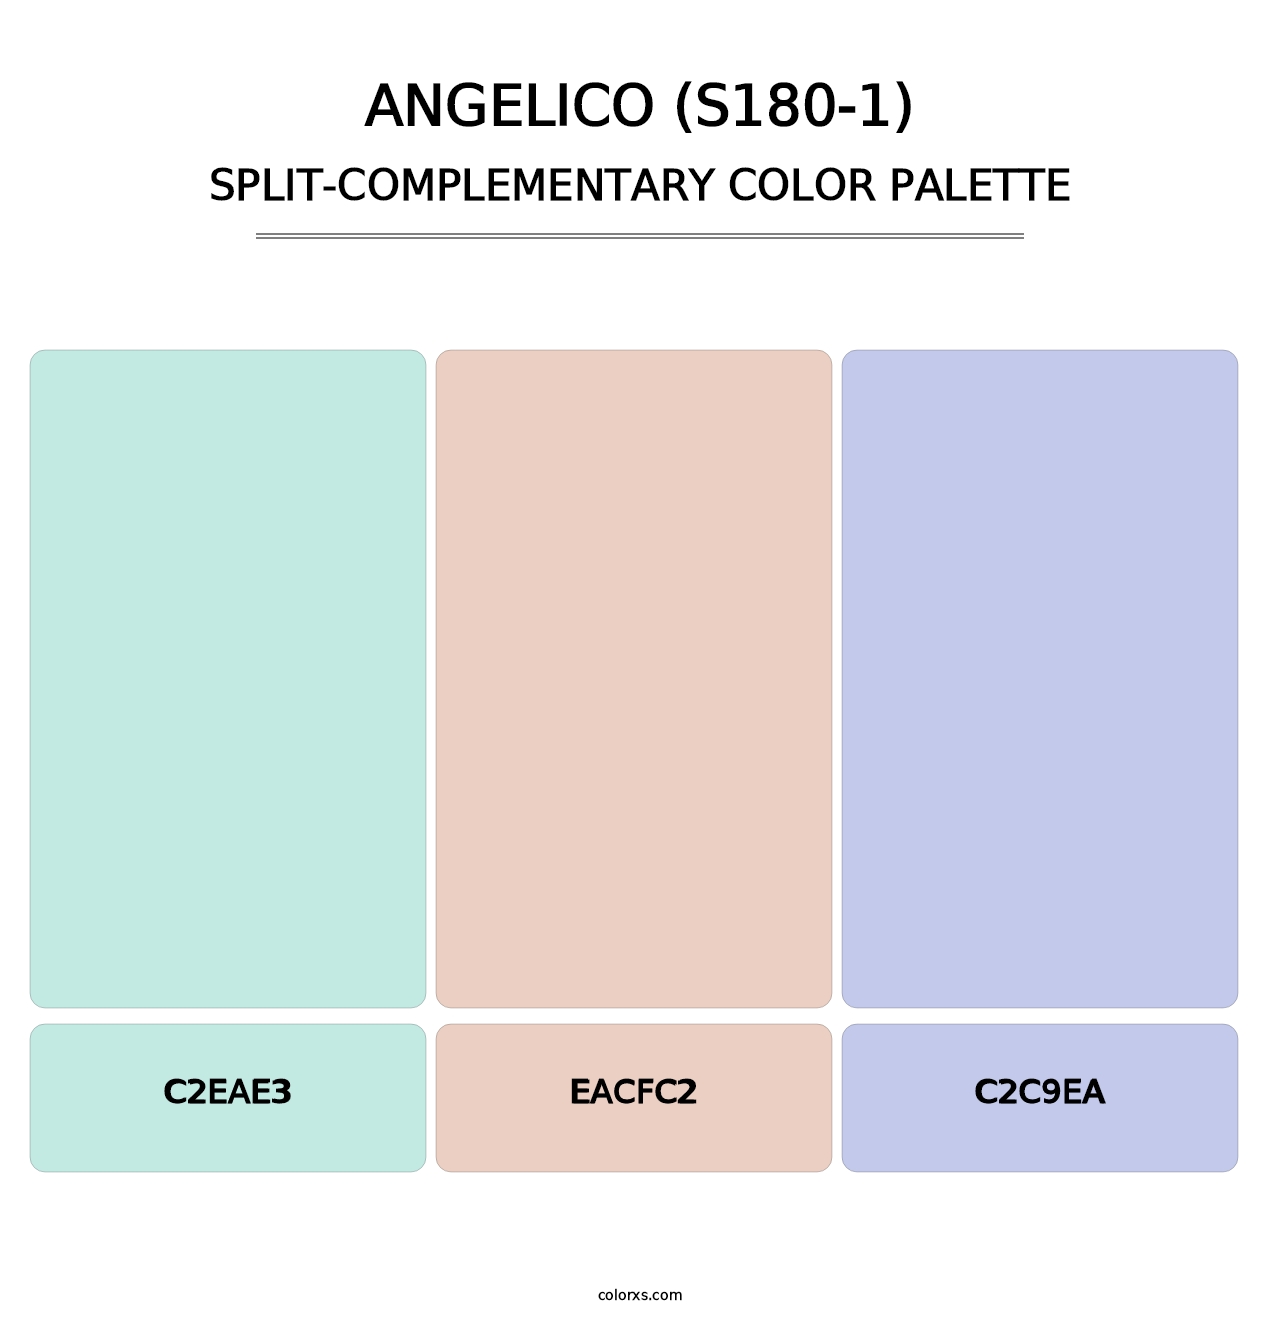 Angelico (S180-1) - Split-Complementary Color Palette